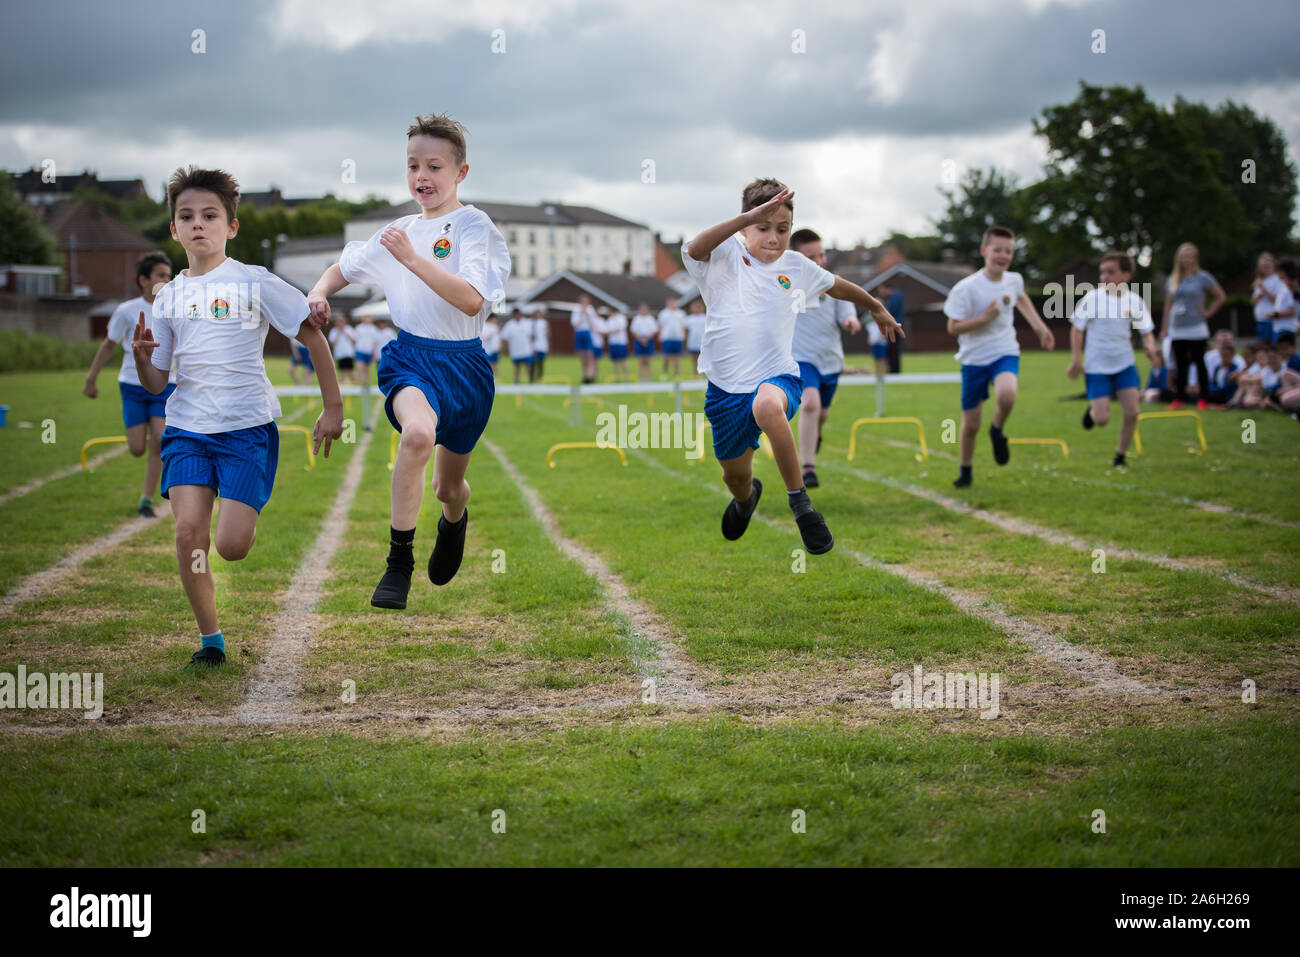 A young boy with ADHD, Autism, Asperger Syndrome takes part in a School sports day event, sitting preparing and sprinting in races, competition Stock Photo